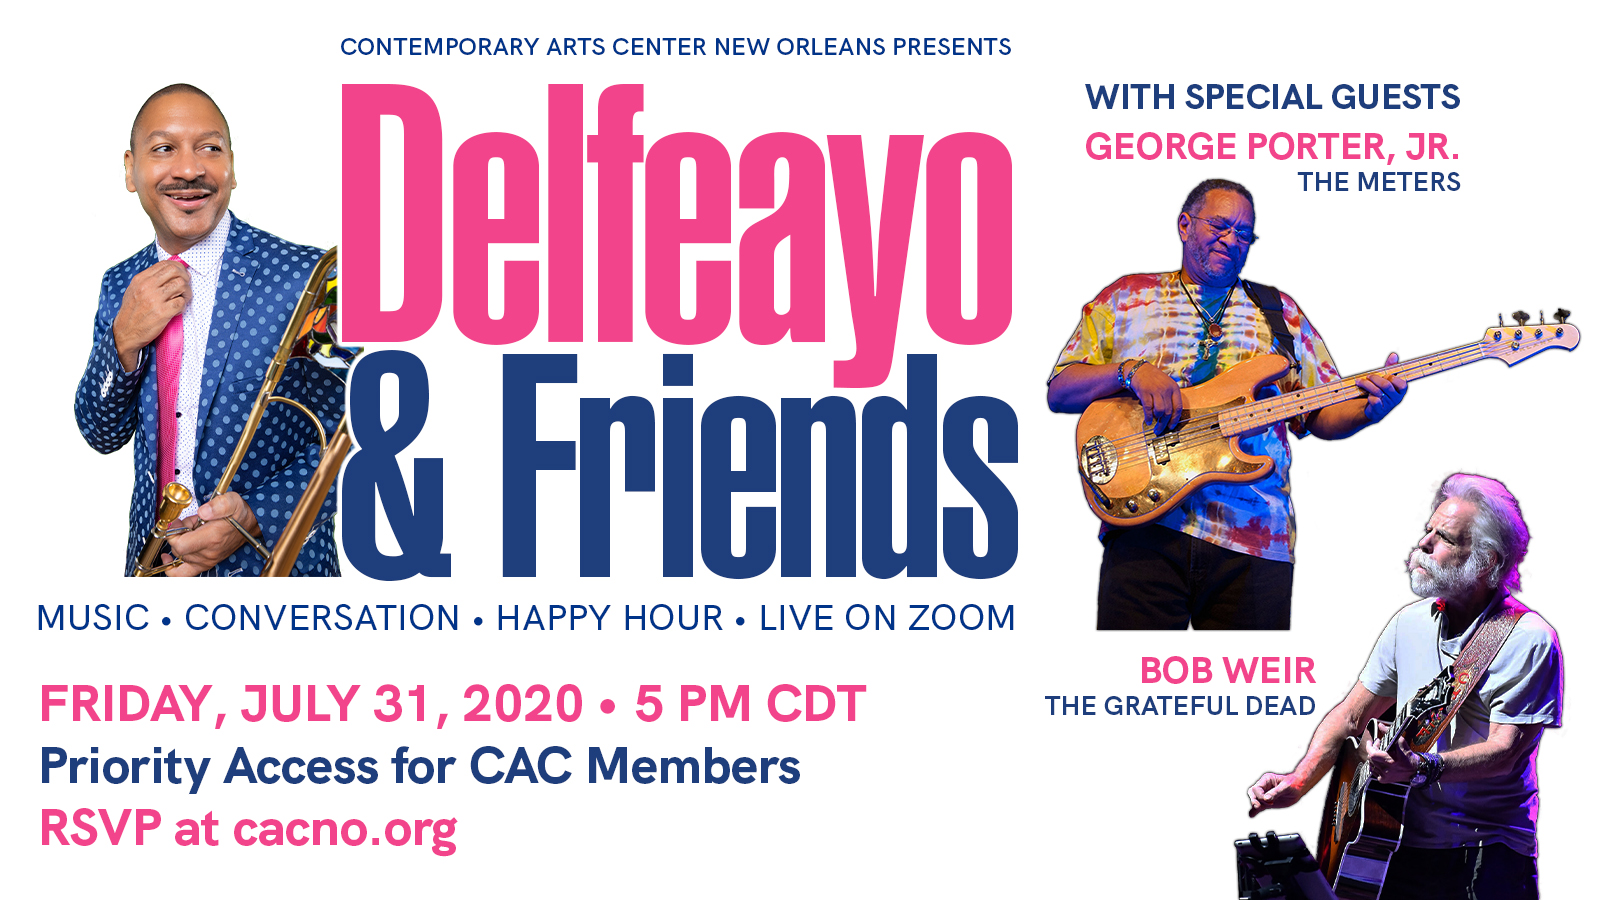 Delfeayo & Friends with Special Guests George Porter, Jr. and Bob Weir